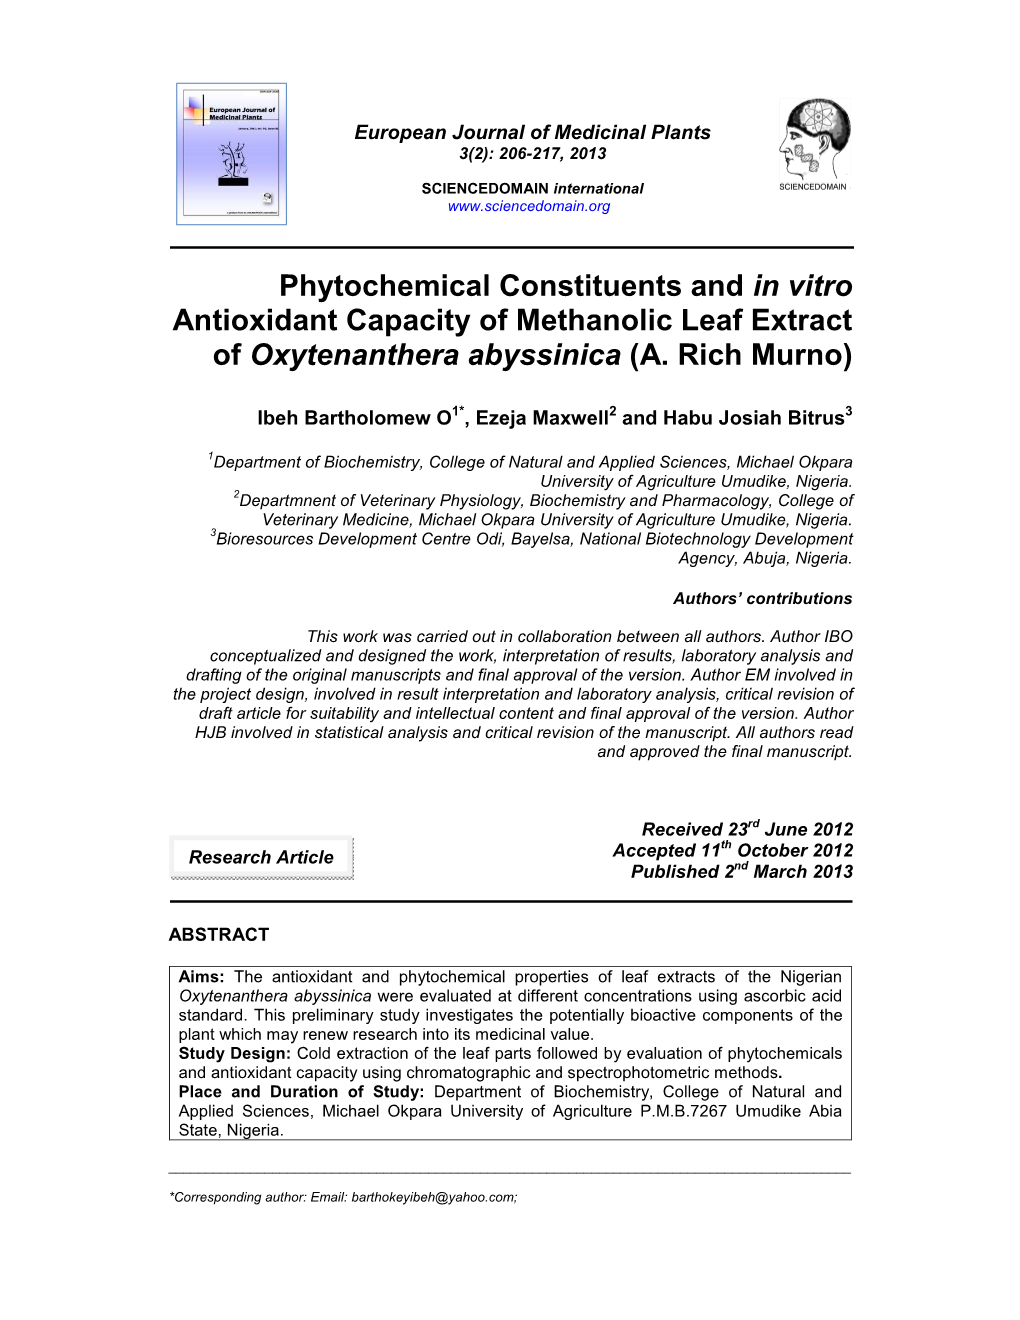 Phytochemical Constituents and in Vitro Antioxidant Capacity of Methanolic Leaf Extract of Oxytenanthera Abyssinica (A